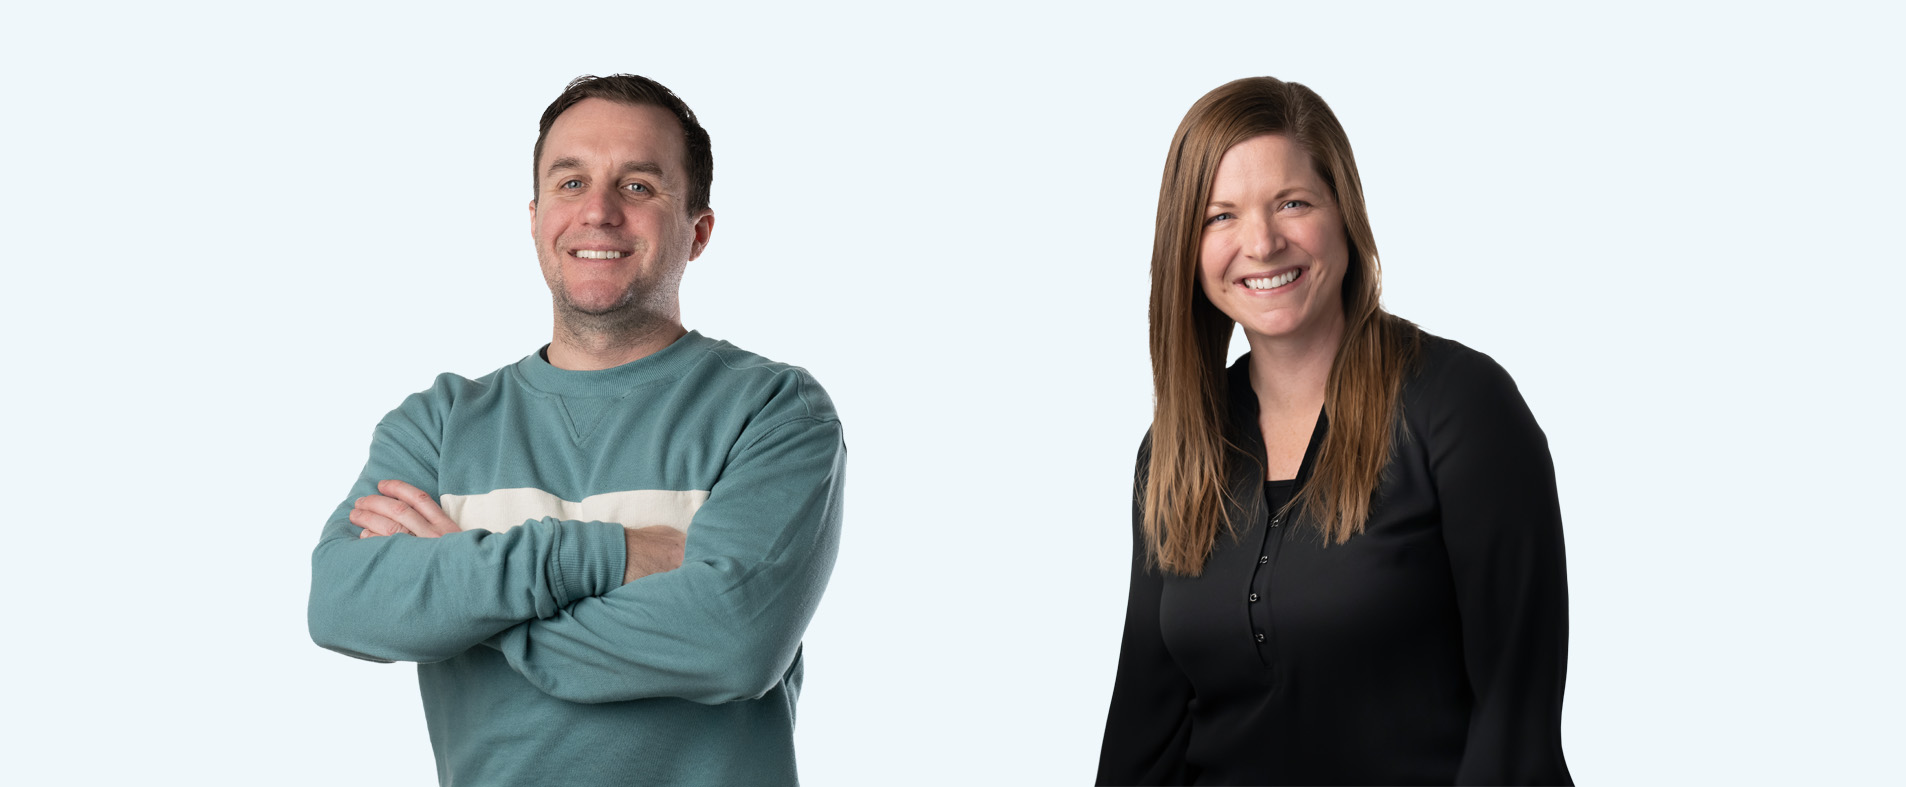 DKY Adds Art Director and Project Manager to Support Outdoor Business